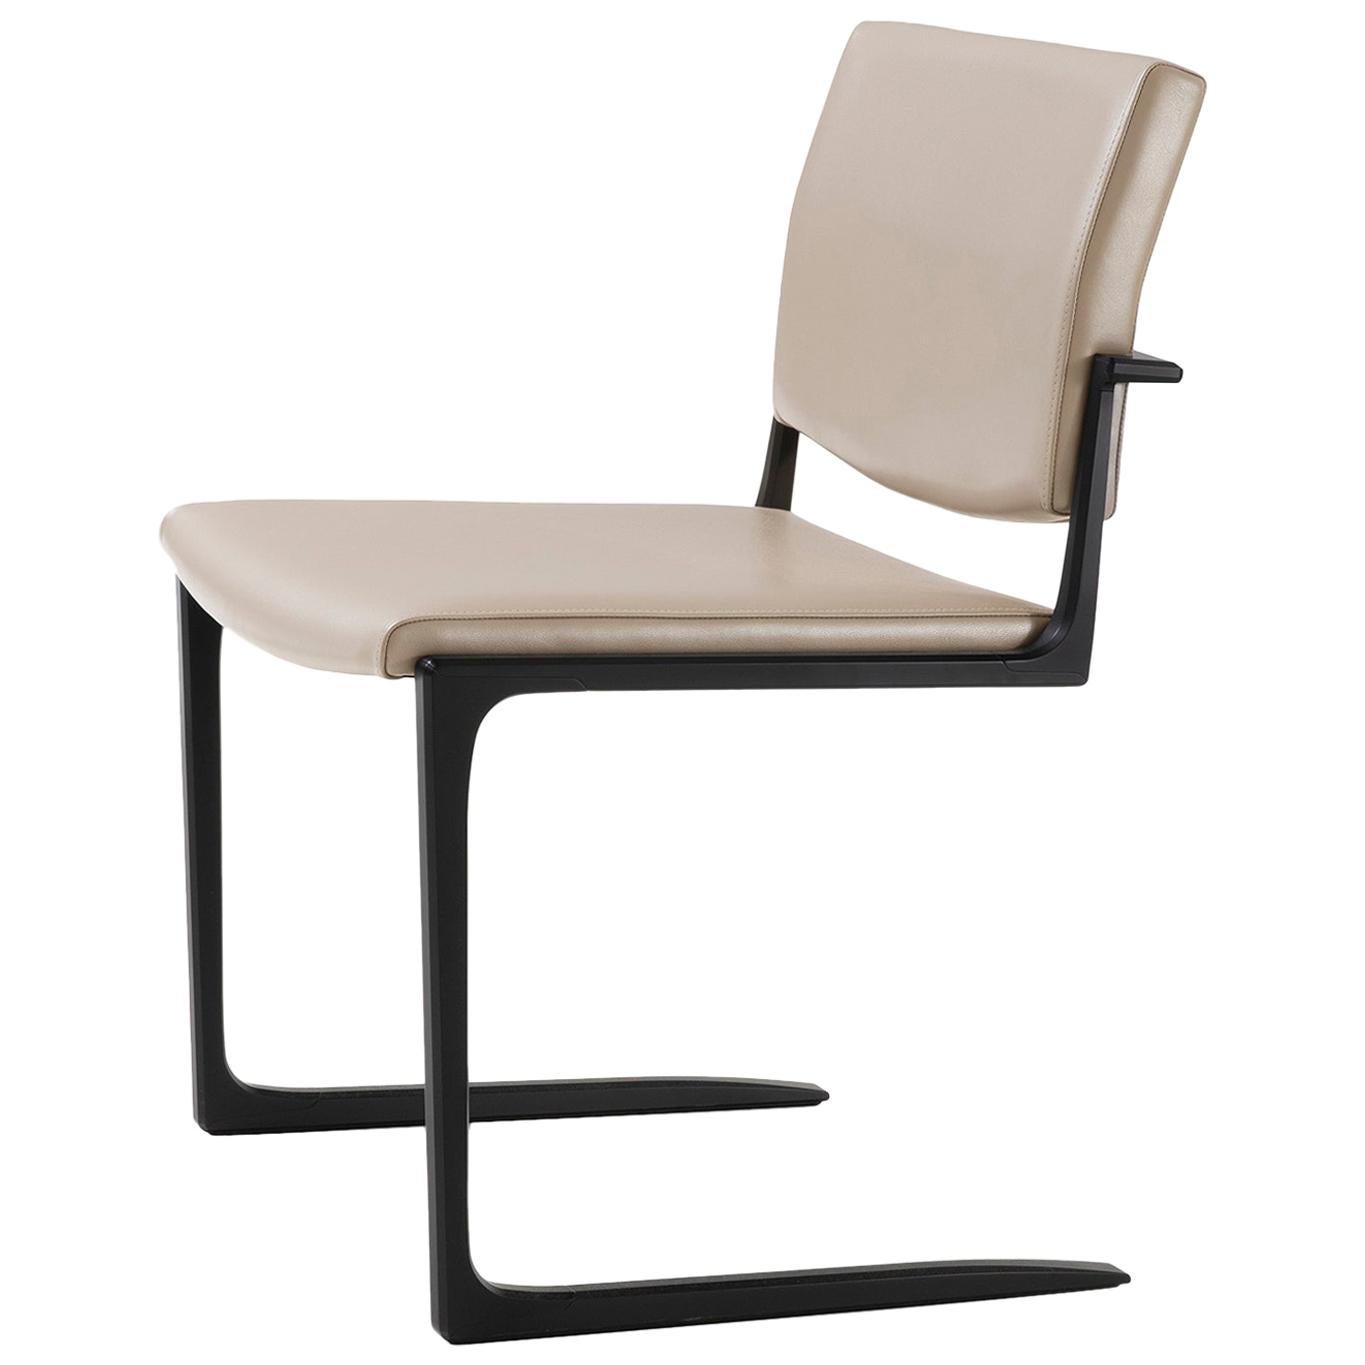 HOLLY HUNT Shadow Dining Chair in Aluminum Frame with Leather Upholstered Seat